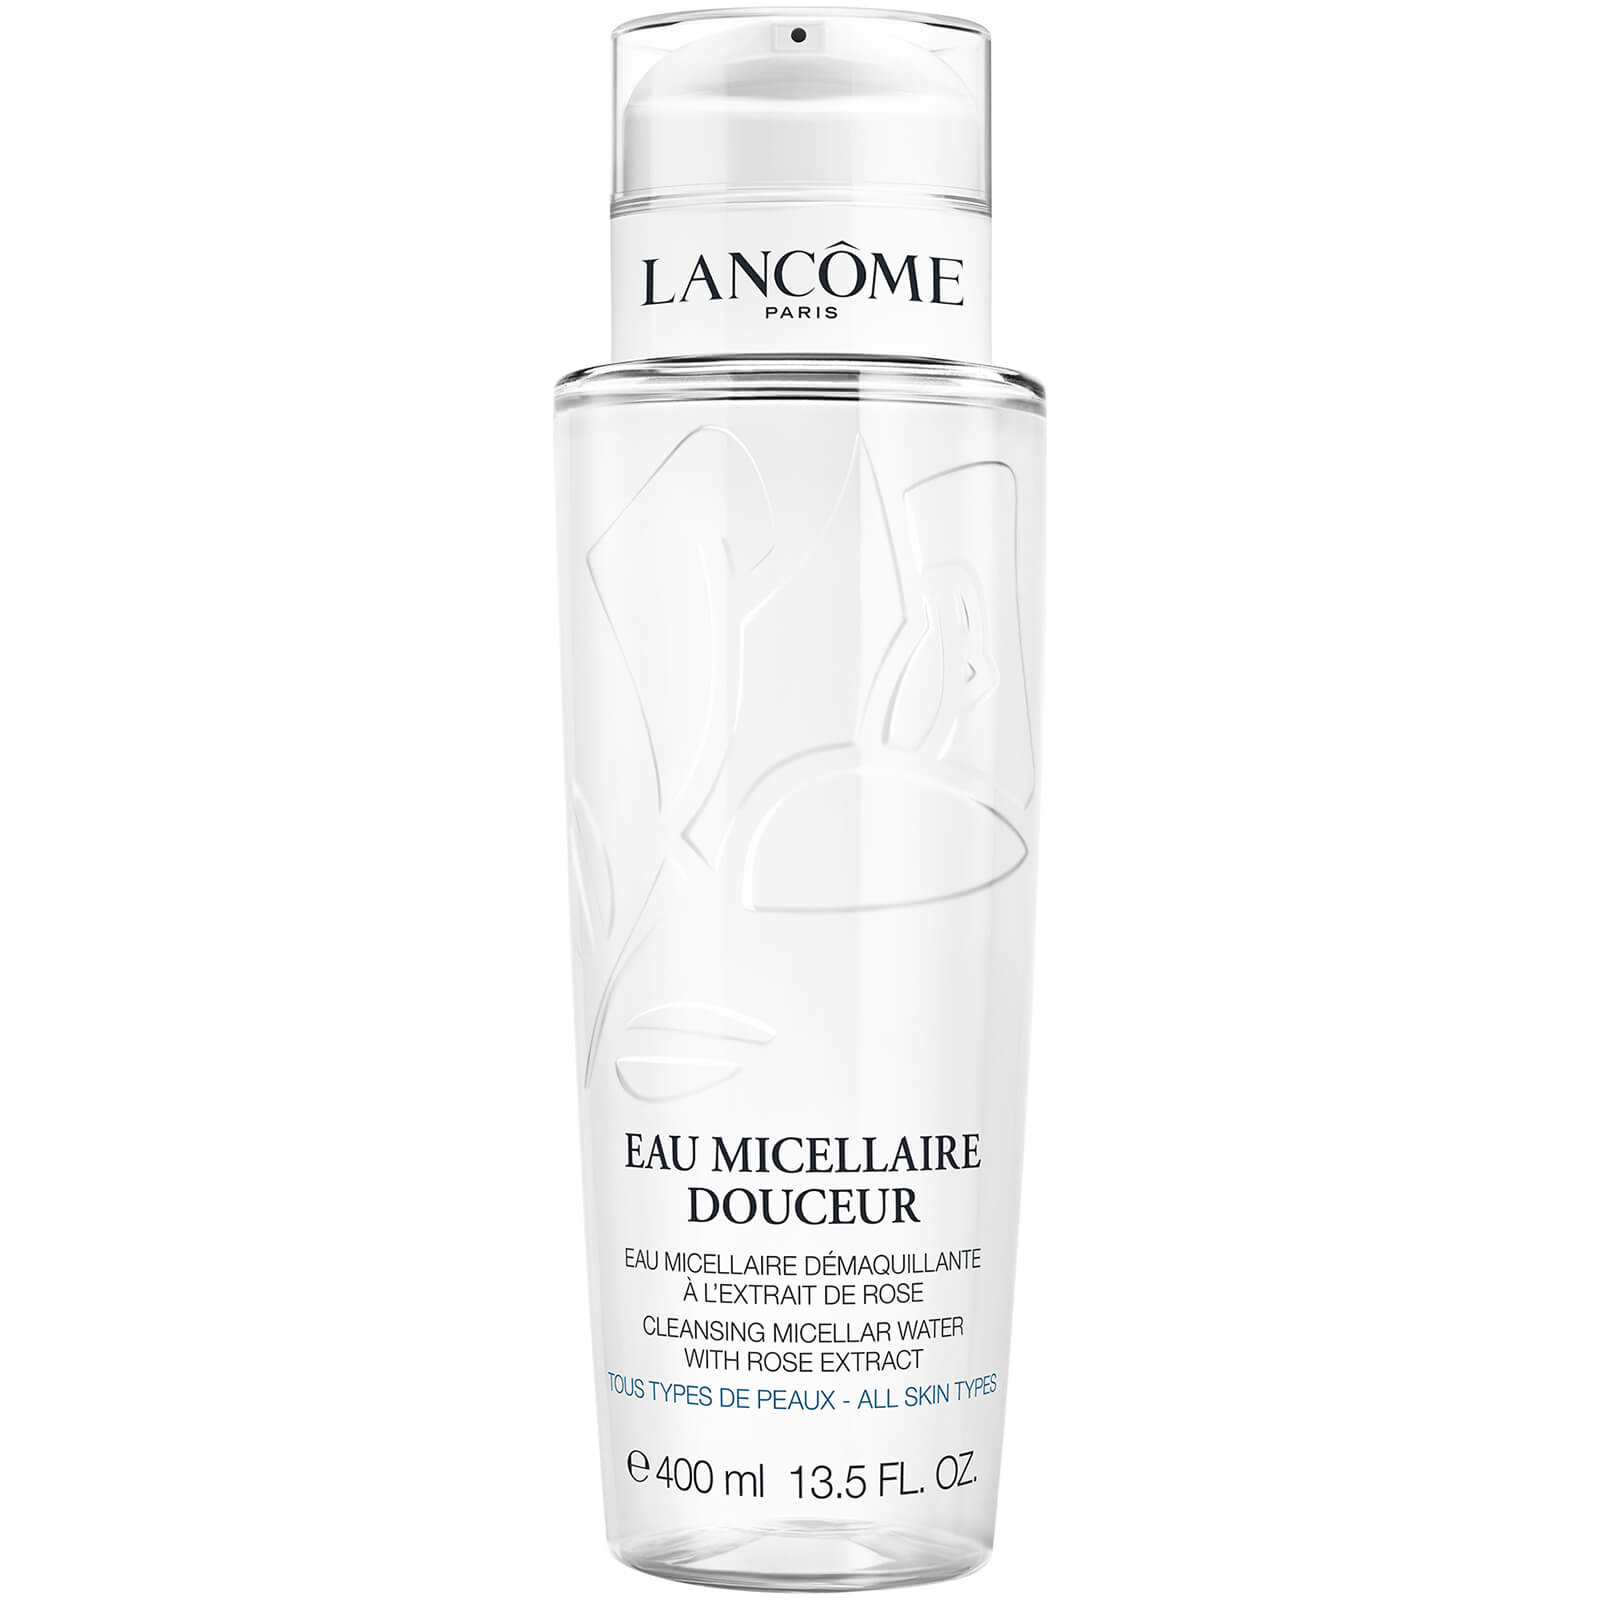 Lancome Eau Micellaire Douceur Express Cleansing Water (Various Sizes) - 400ml